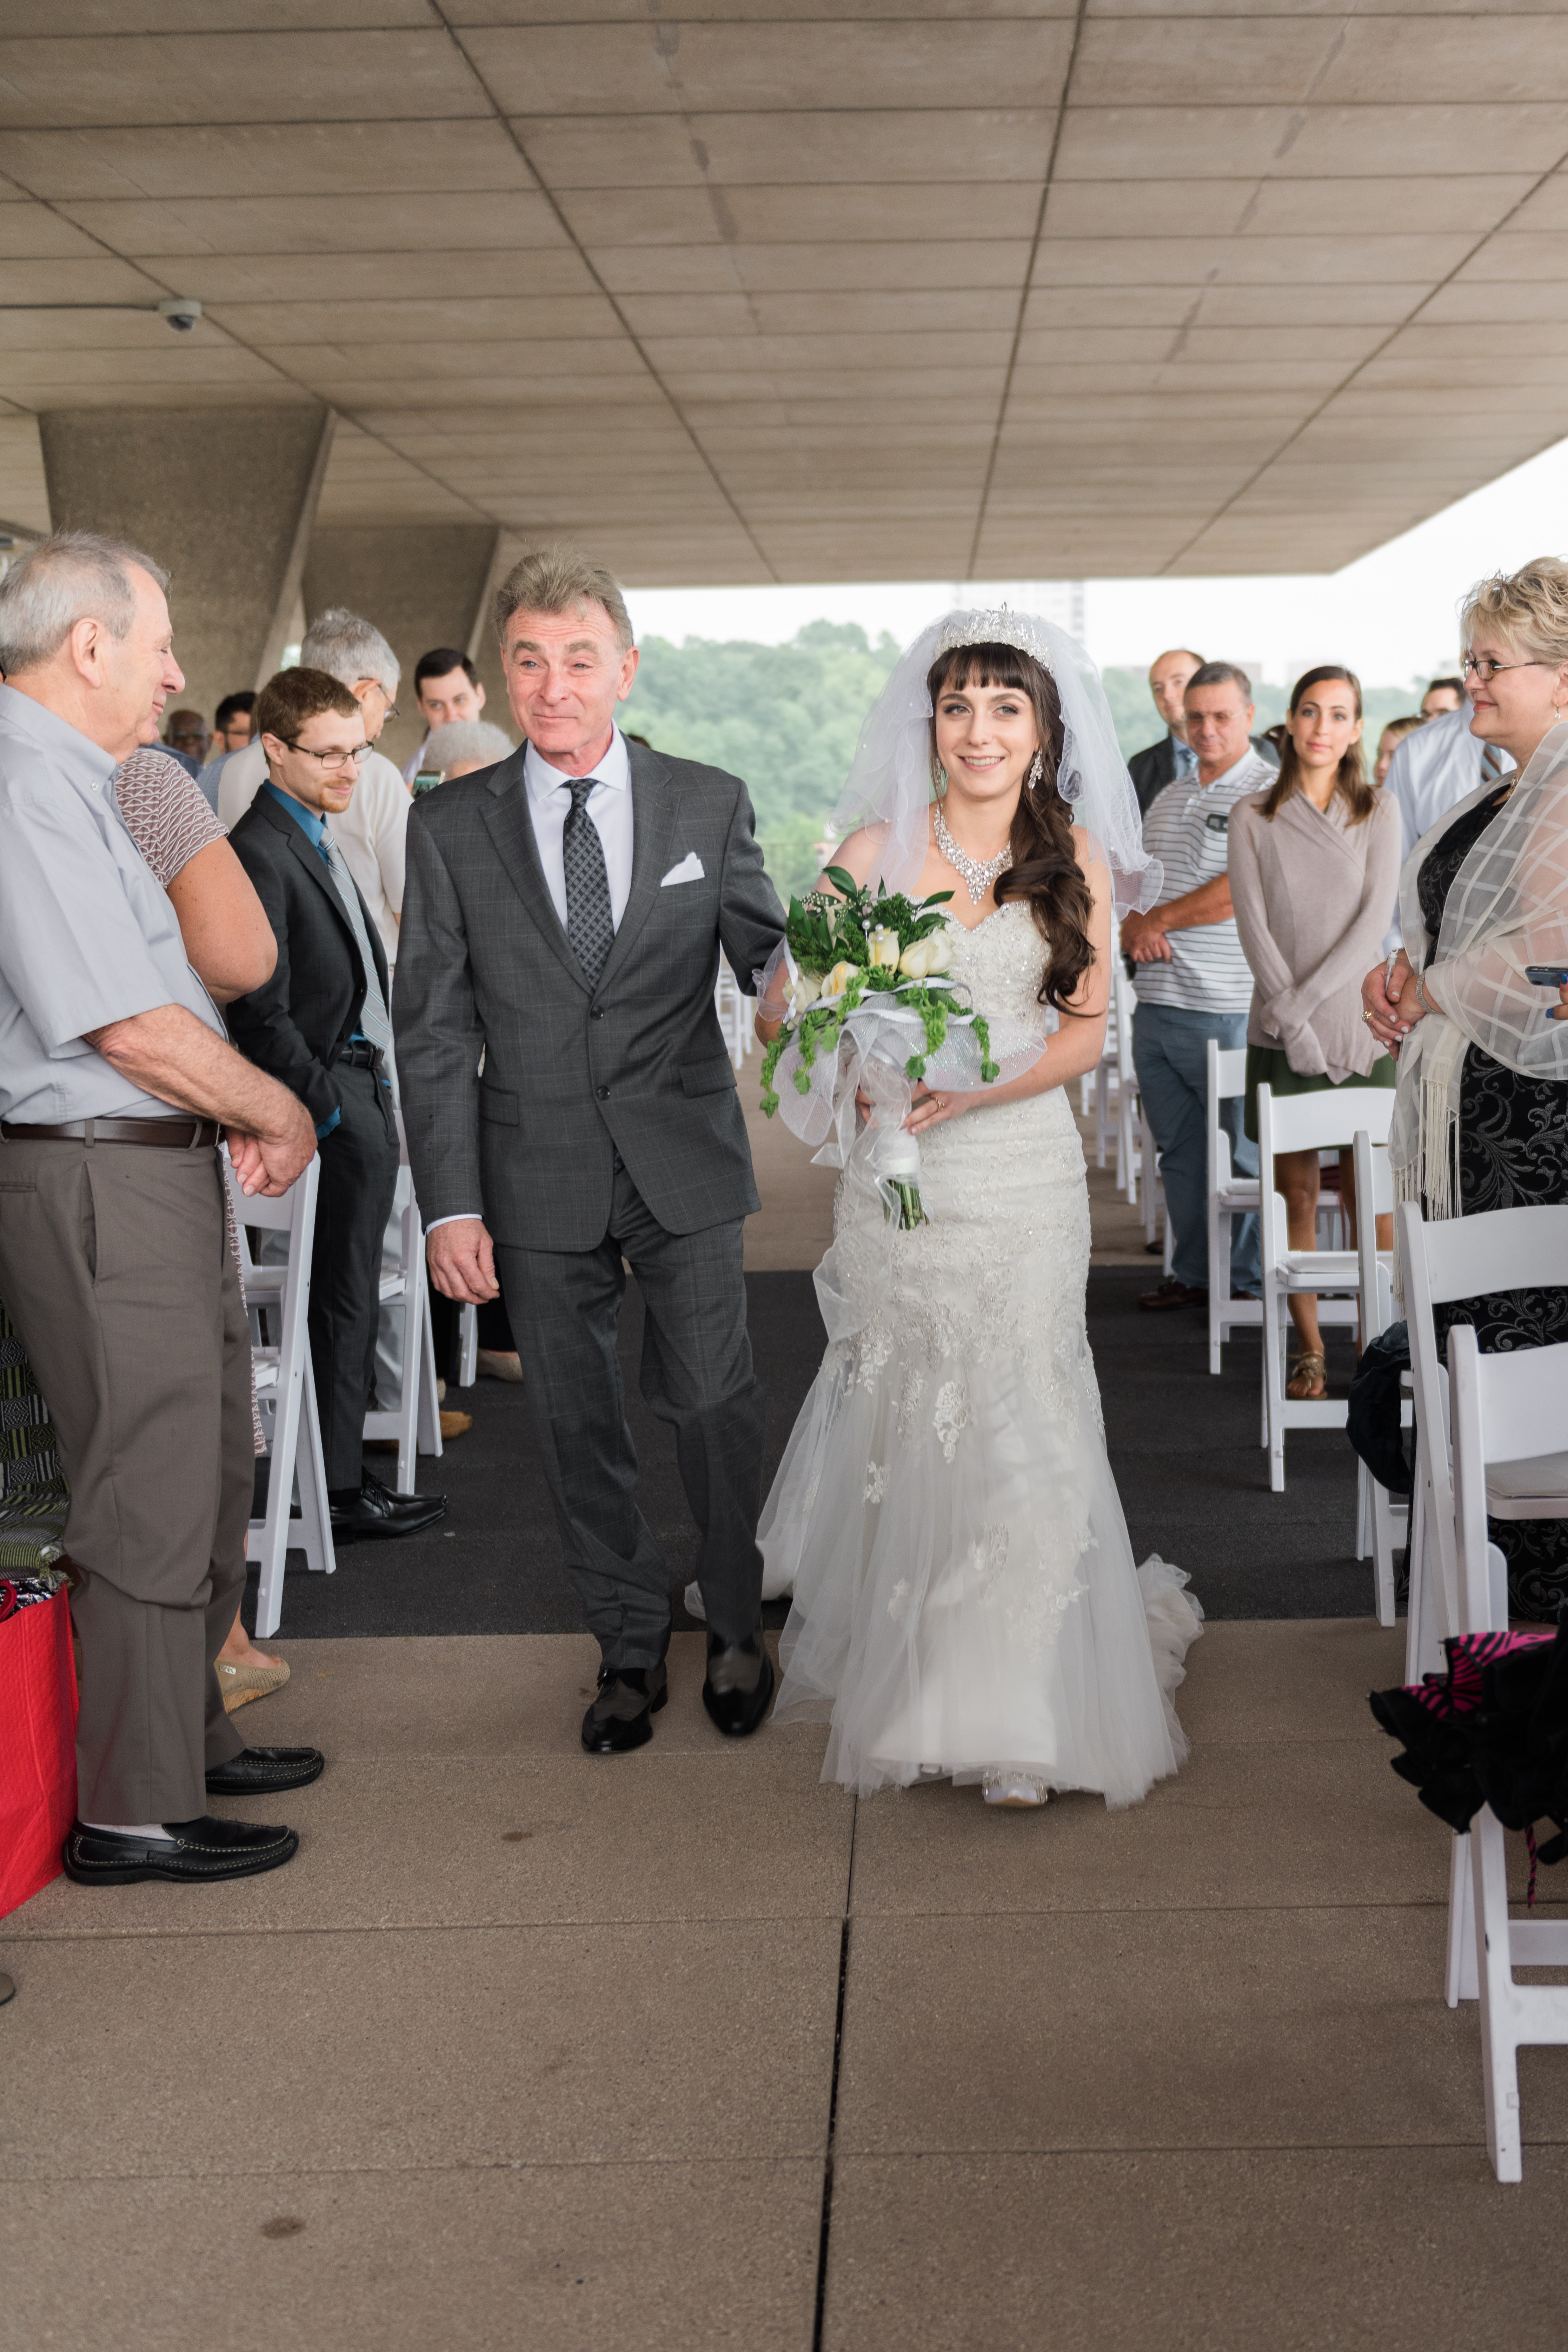 Bride walking down the aisle with her father